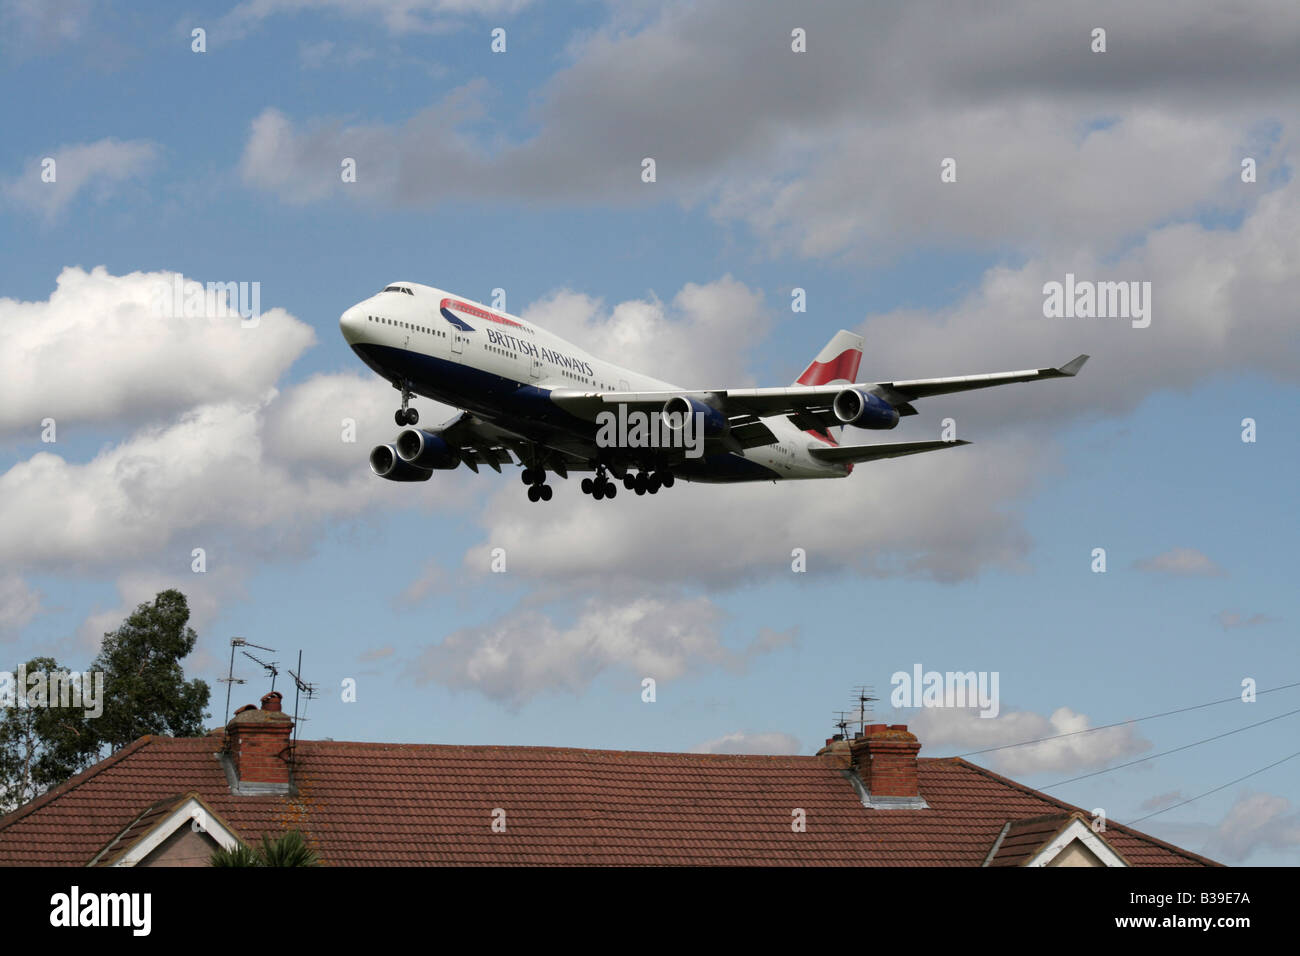 British Airways Boeing 747-400 passenger jet airliner overflies a house while on approach to Heathrow Airport. Civil aviation and noise pollution. Stock Photo